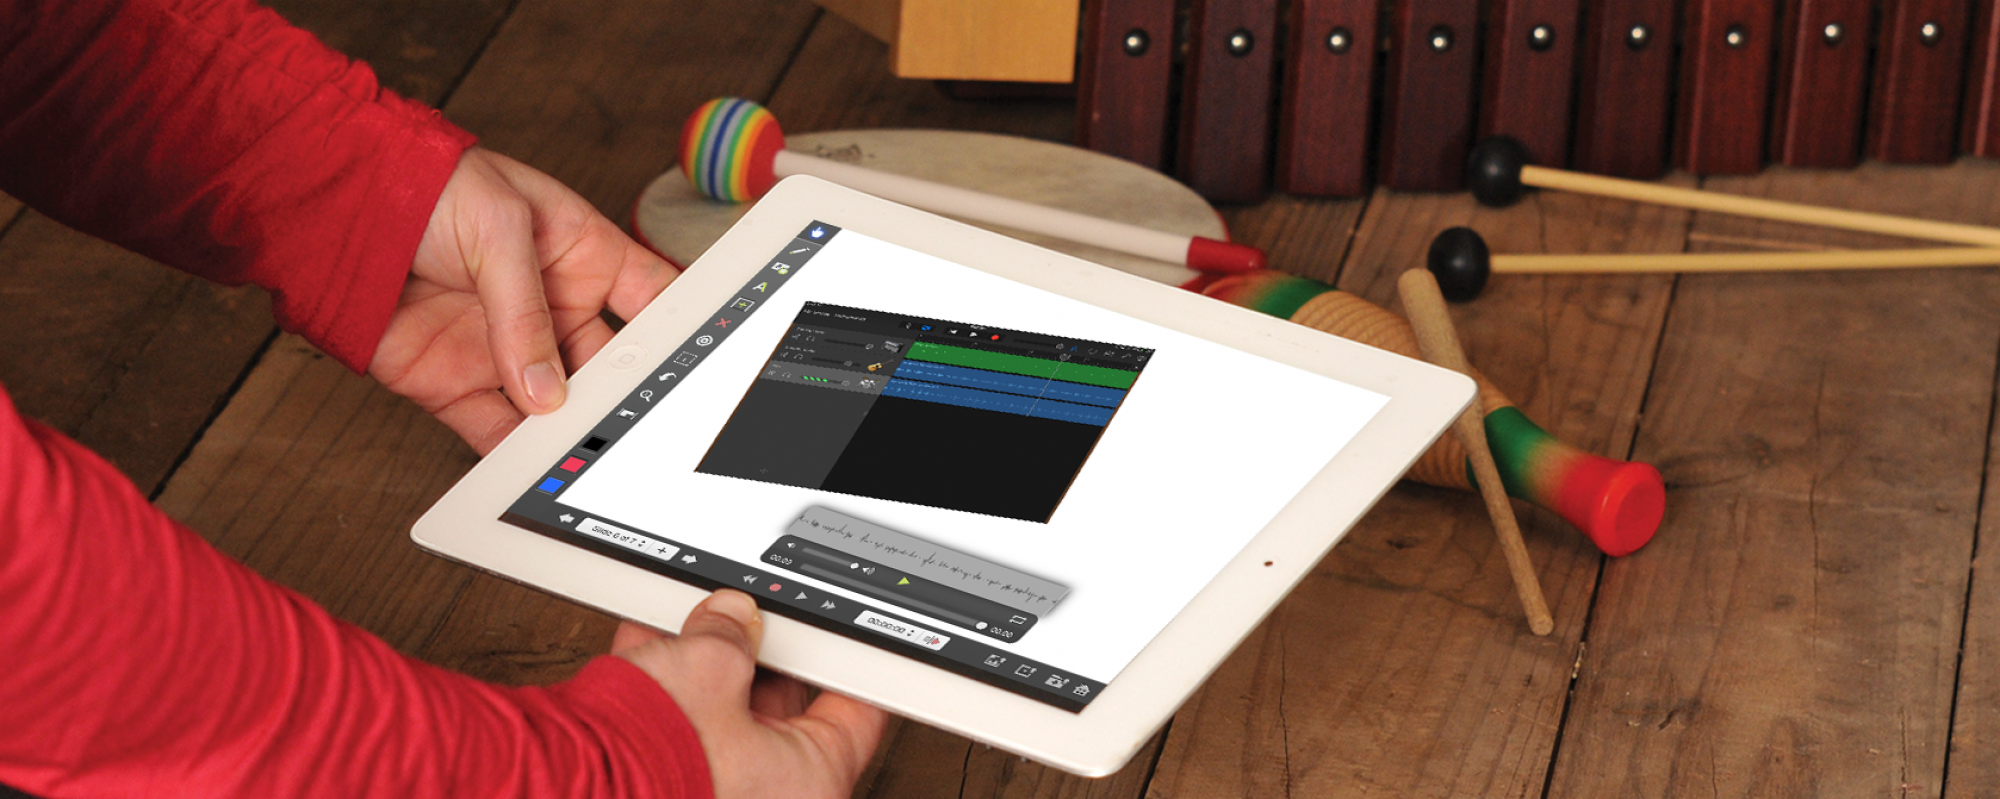 21 iPad Apps for the Music Classroom: General Education ...